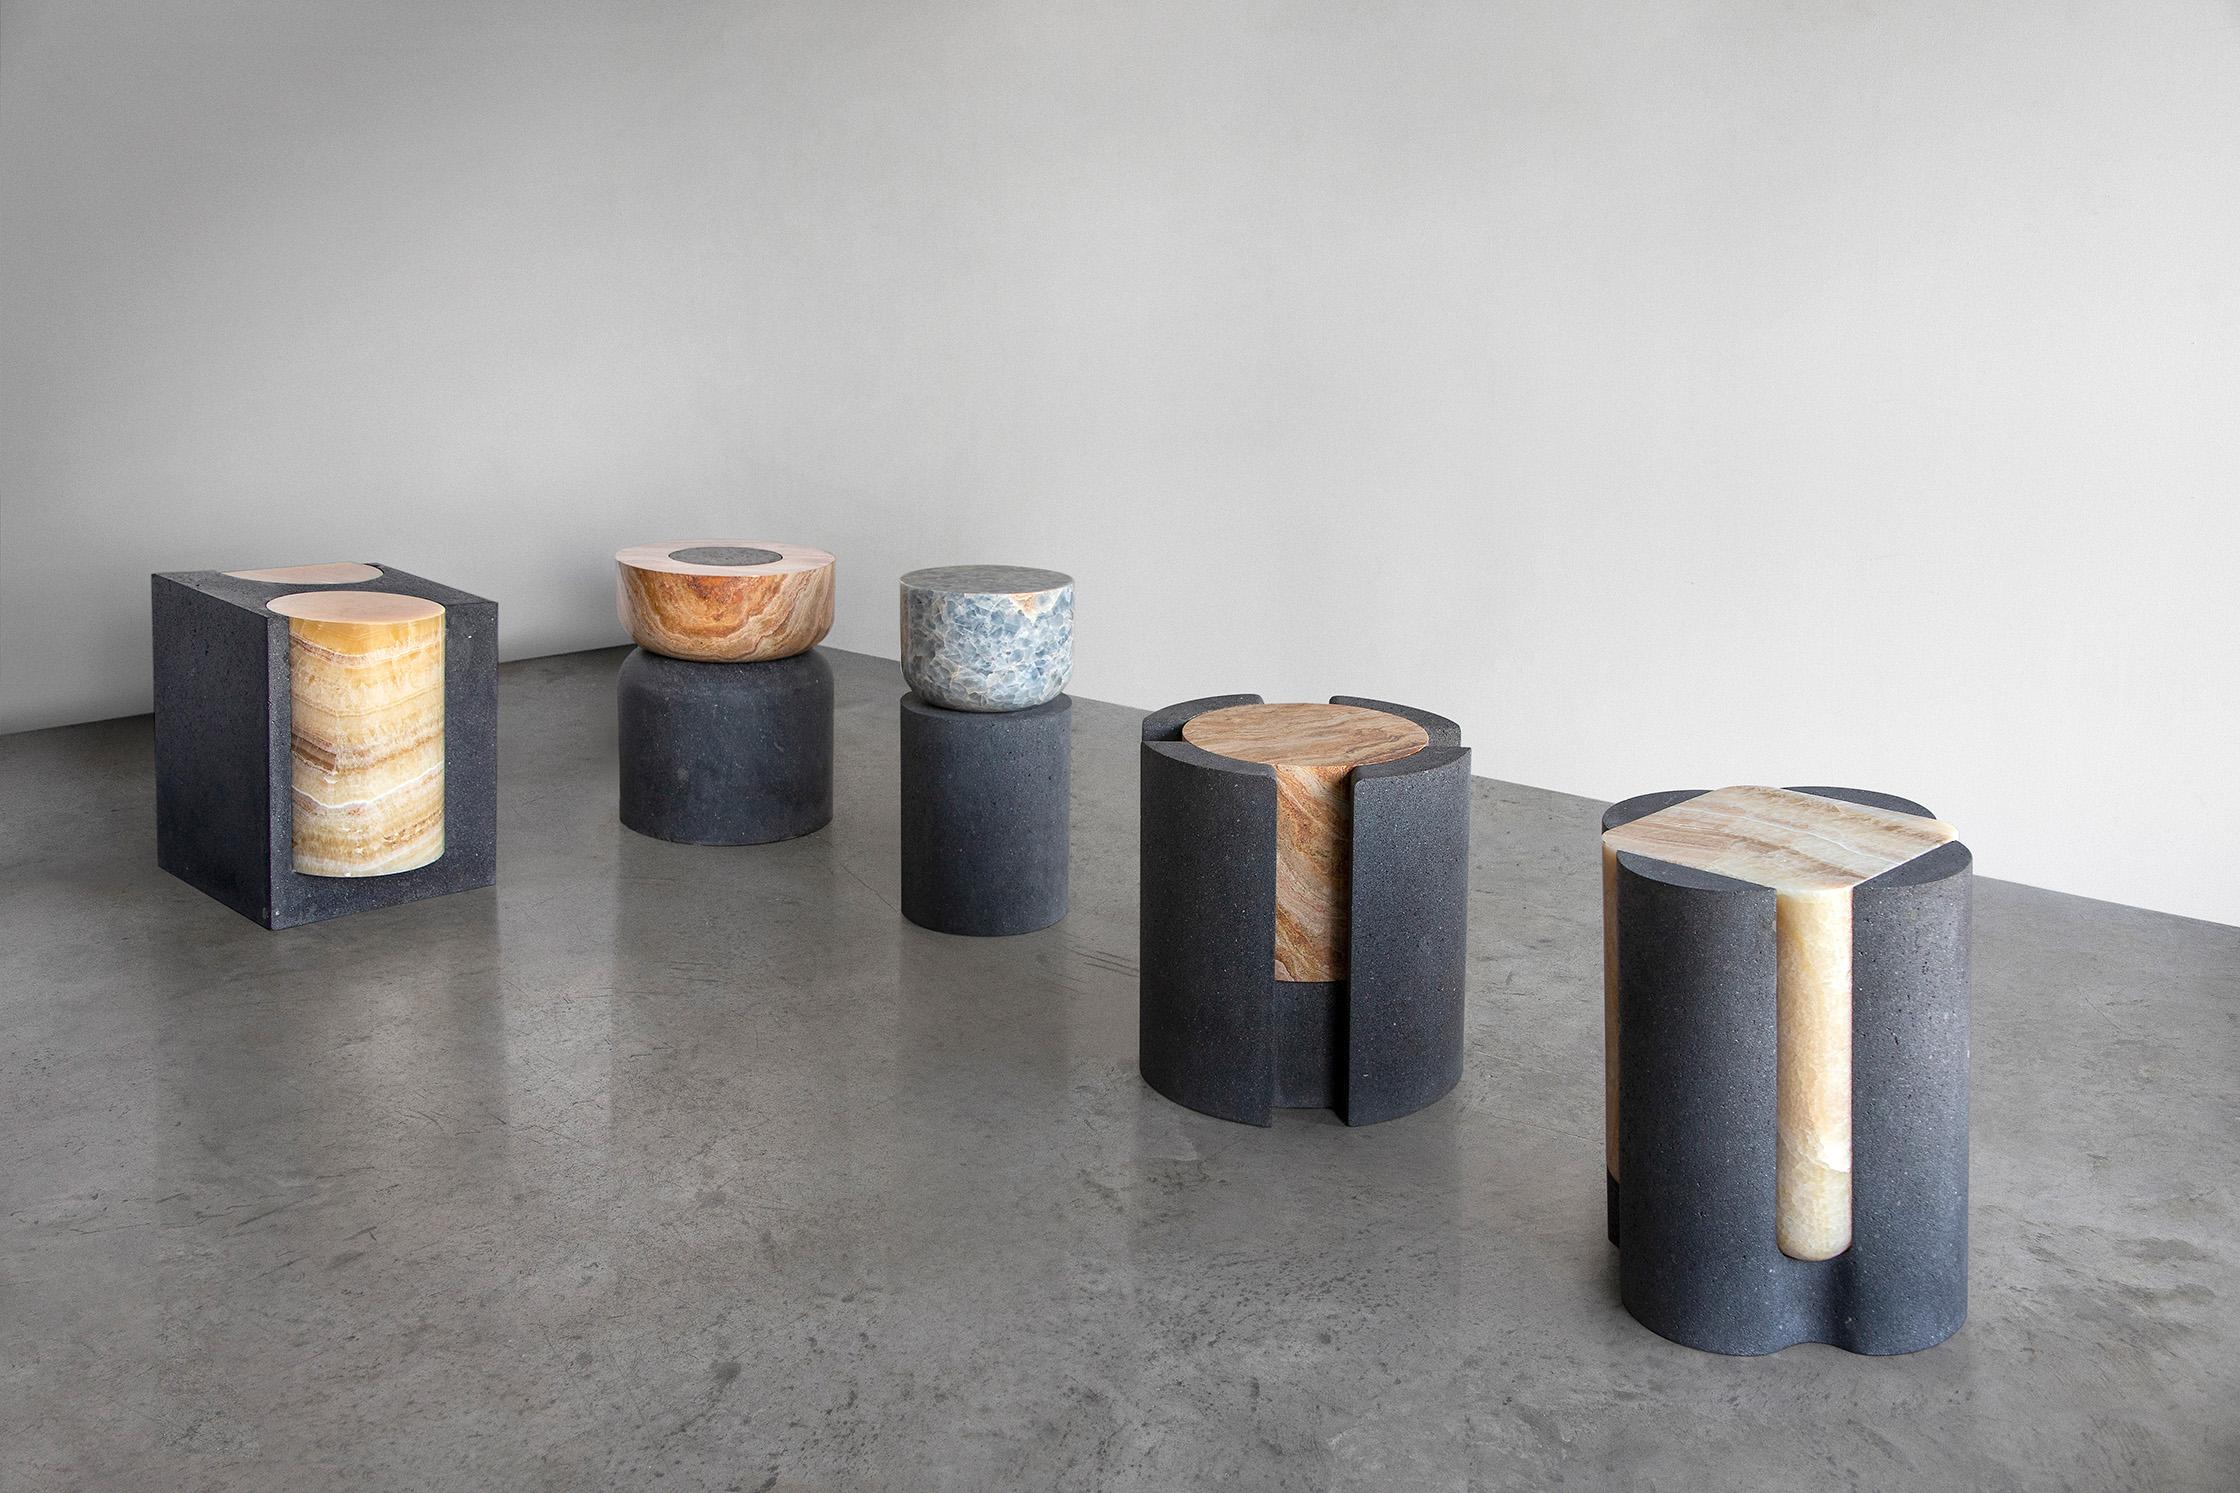 Organic Modern Volcanic Shade I Stool/Table by Sten Studio, Represented by Tuleste Factory